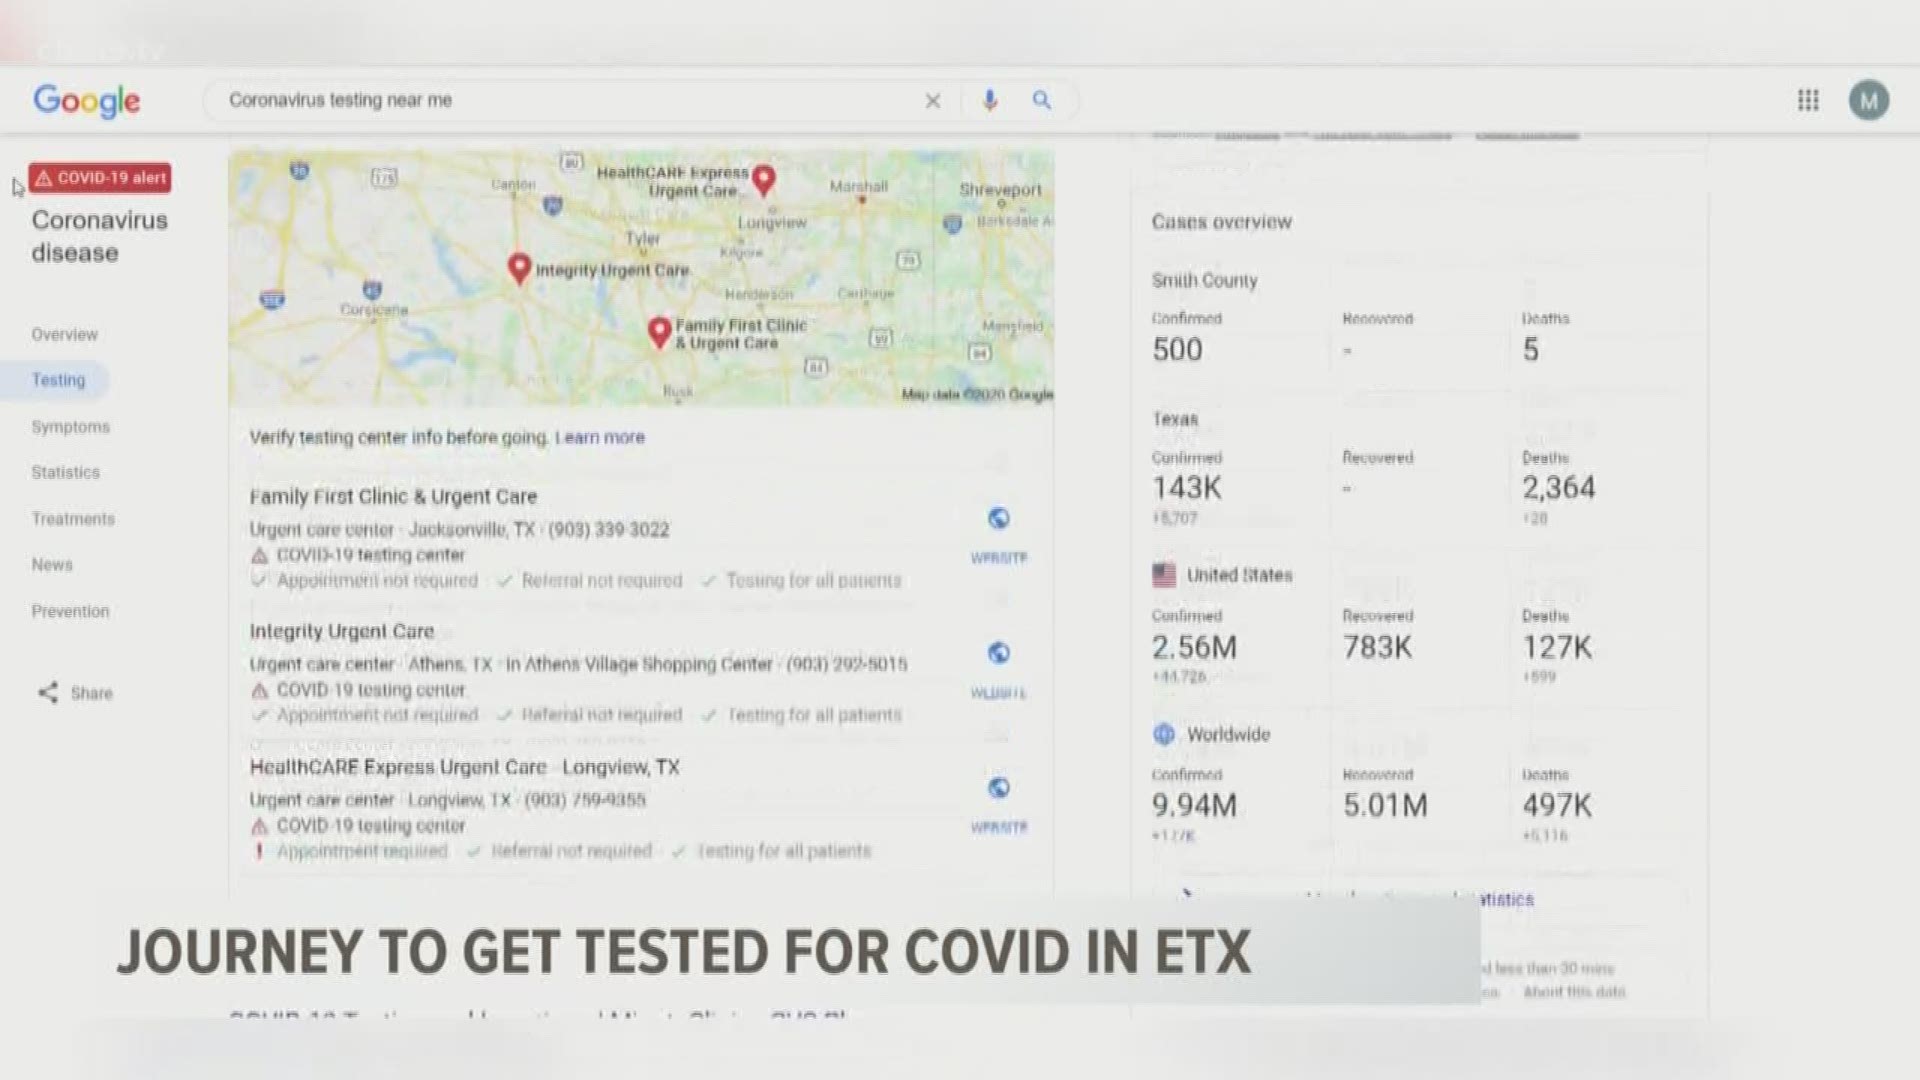 How hard is it to be tested for COVID-19? CBS19's Matt Lackritz was searching for a test after being exposed to the virus earlier in the week.